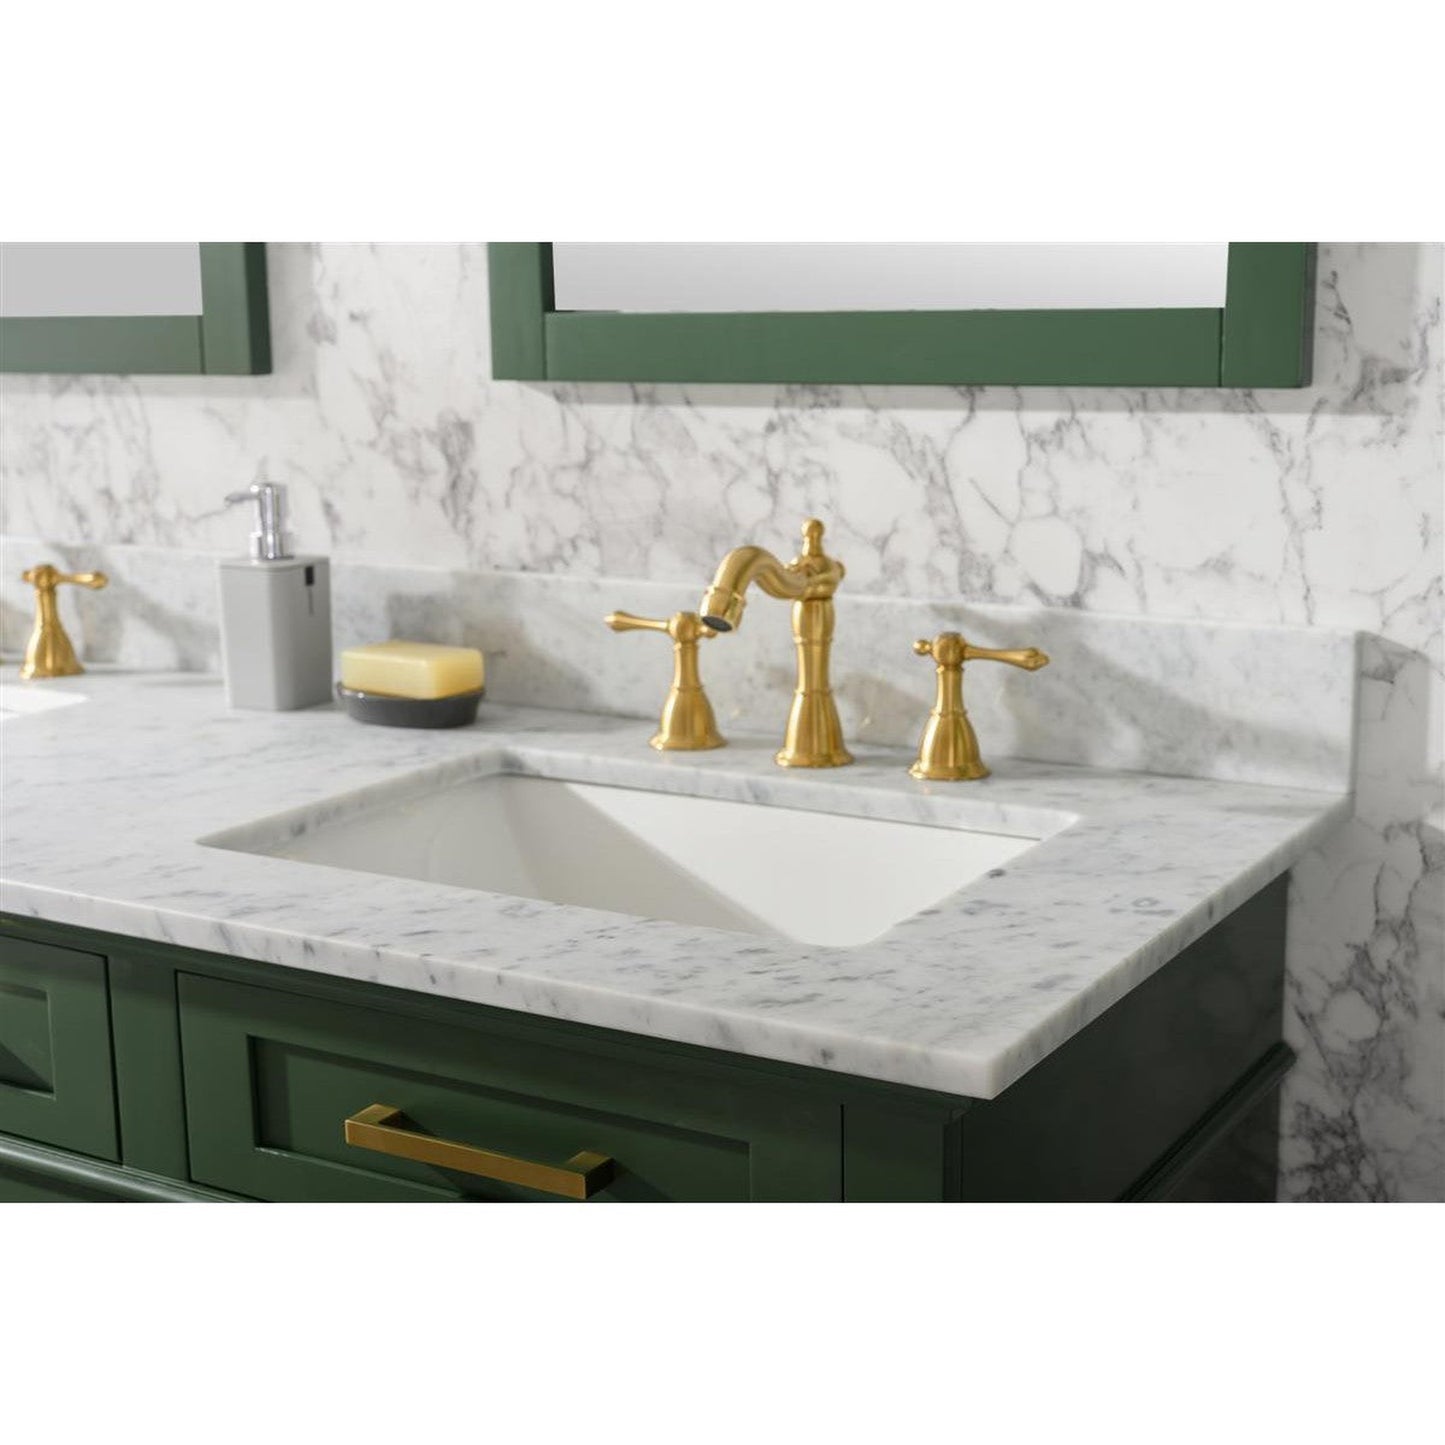 Legion Furniture WLF2260D 60" Vogue Green Freestanding Vanity With White Carrara Marble Top and Double White Ceramic Sink